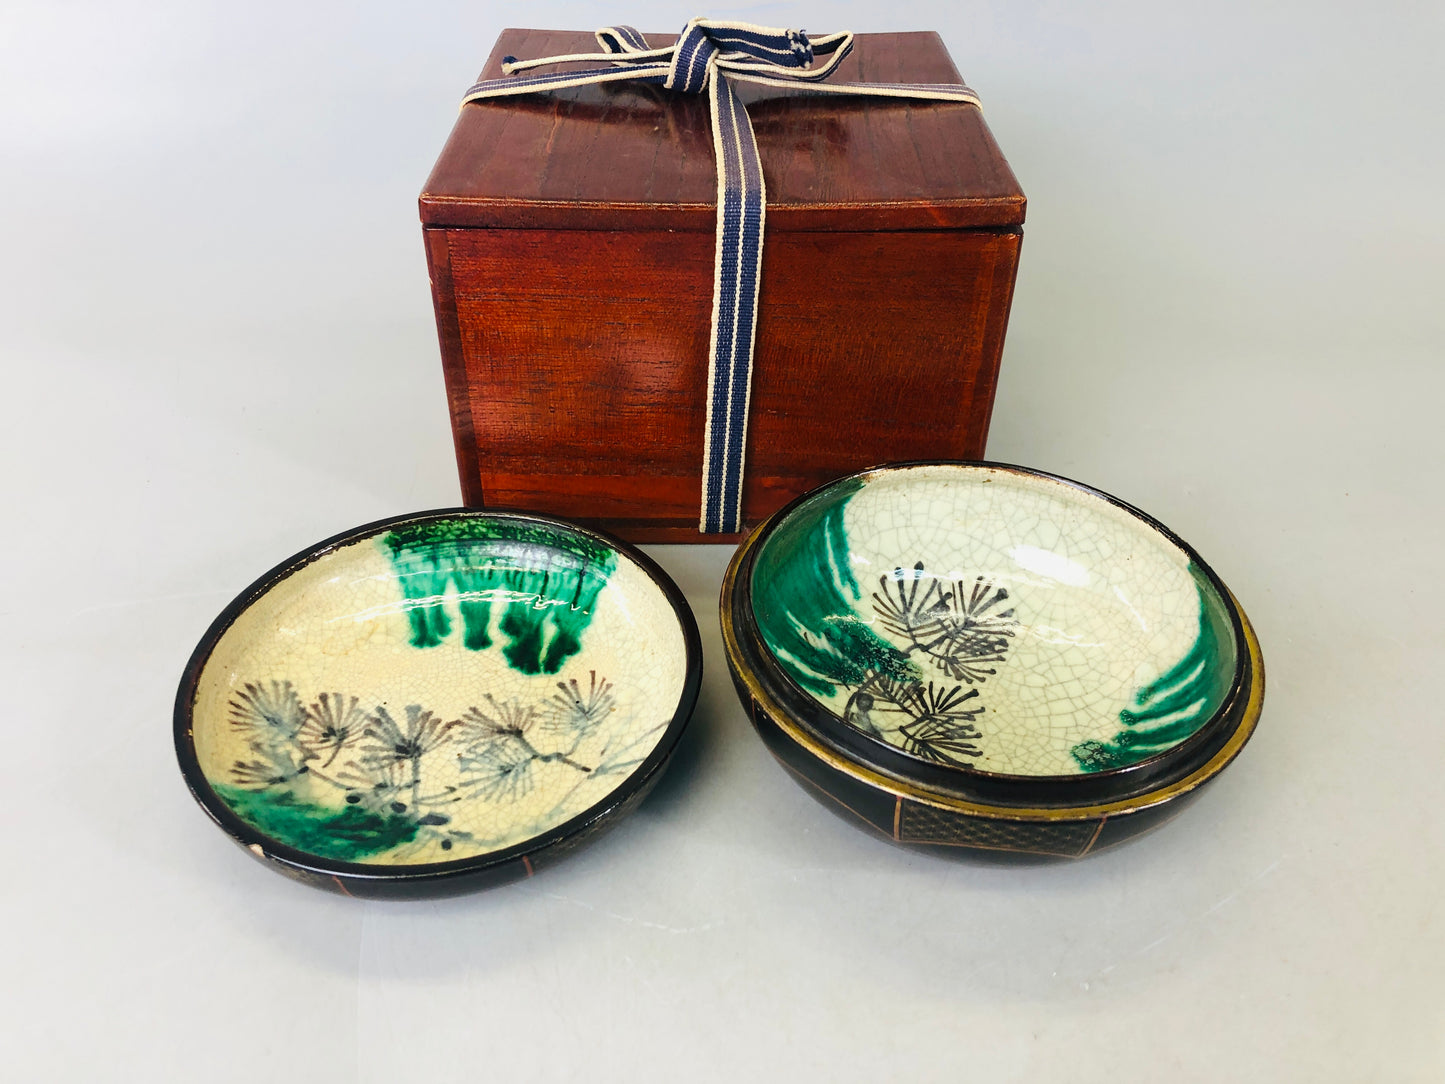 Y6395 [VIDEO] BOX Raku-ware Jikiro confectionery container Makie signed Japan antique